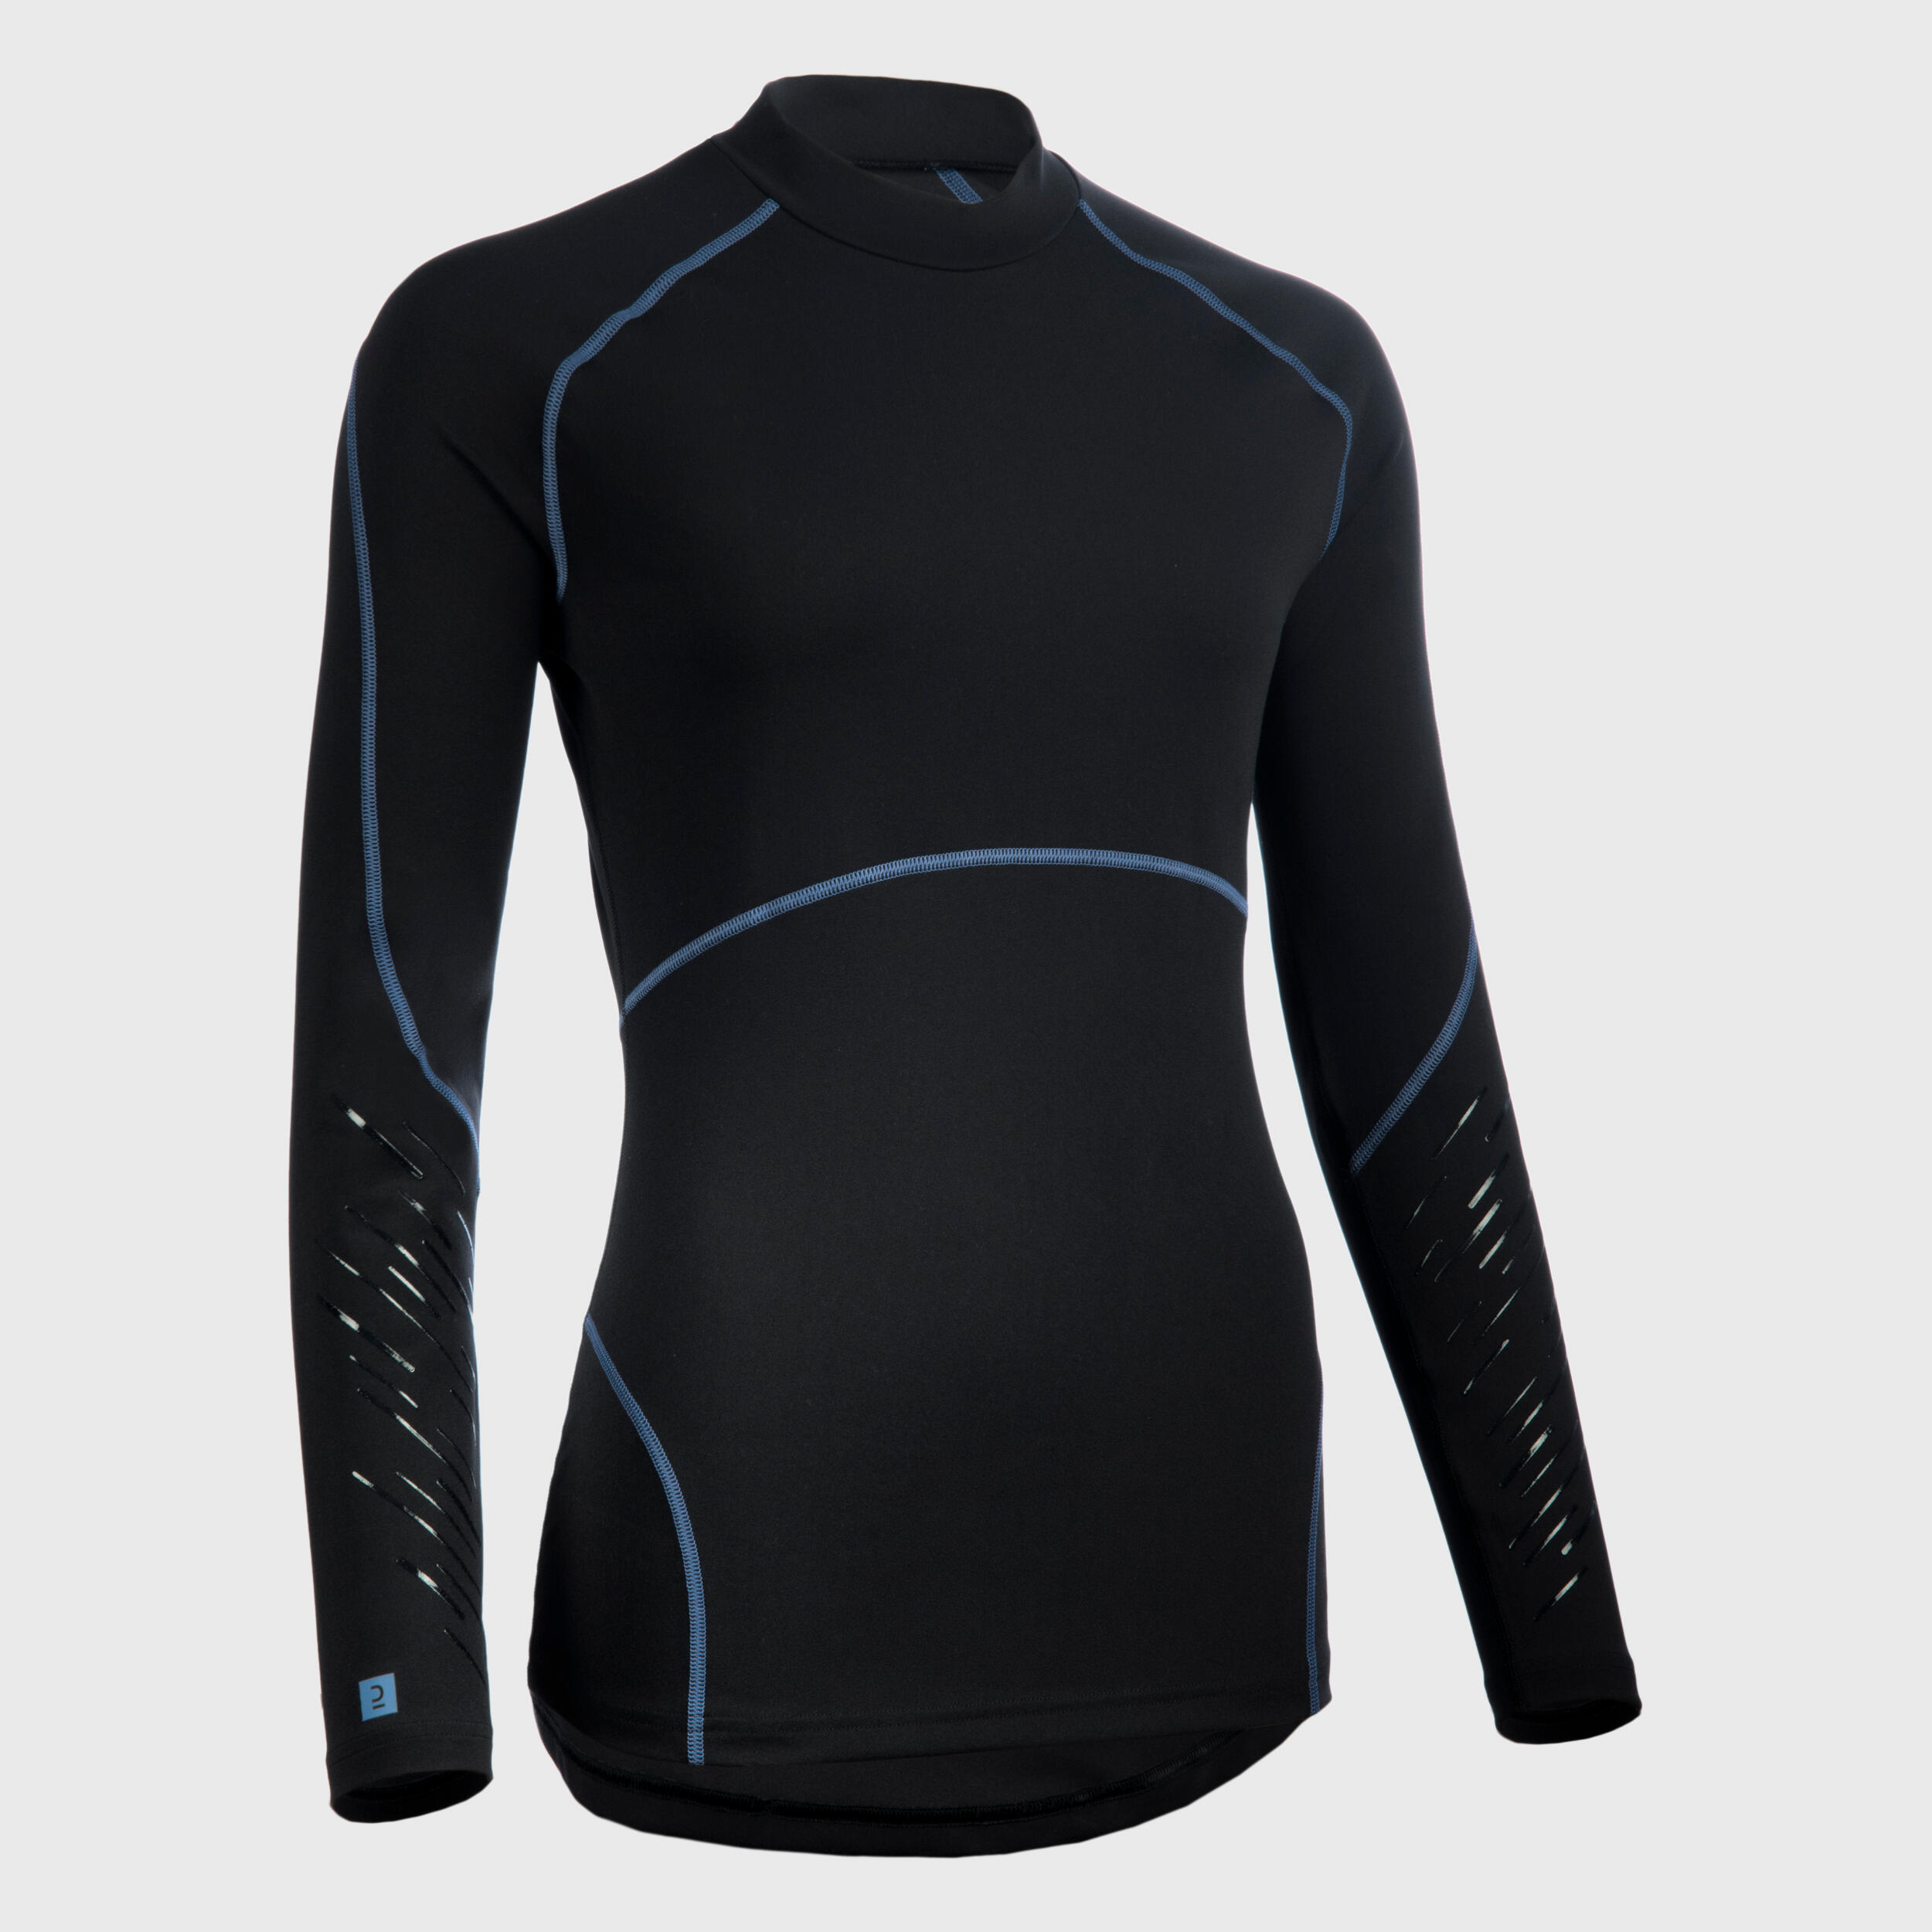 Women's Long-Sleeved Rugby Base Layer 500 - Black/Stormy Blue 1/4